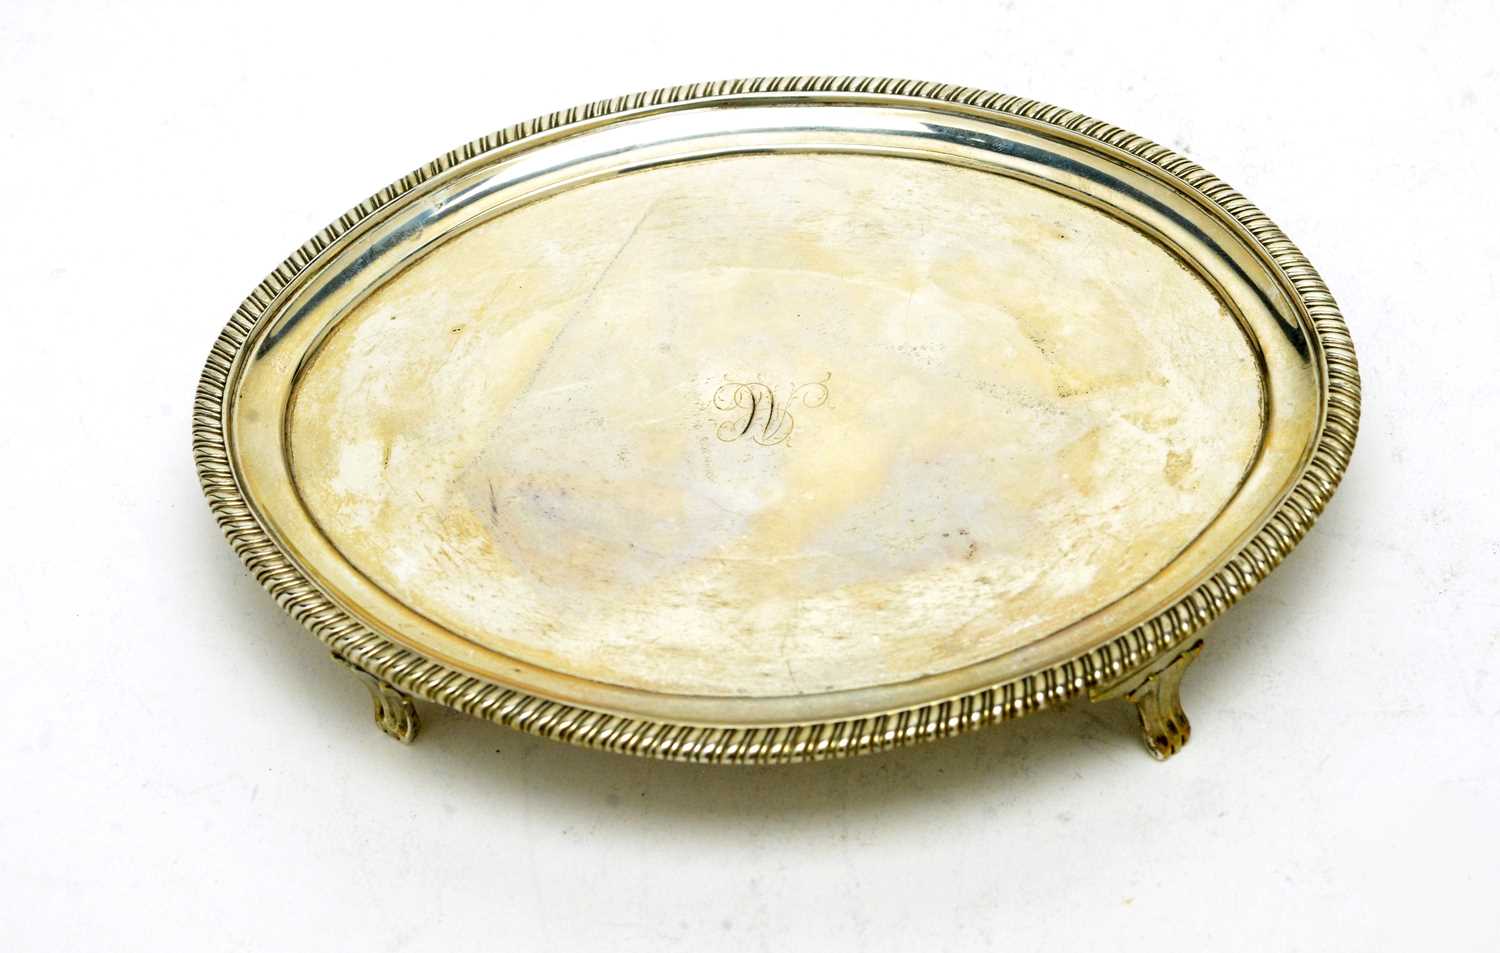 Lot 562 - A George III silver teapot stand, by John Stoyte